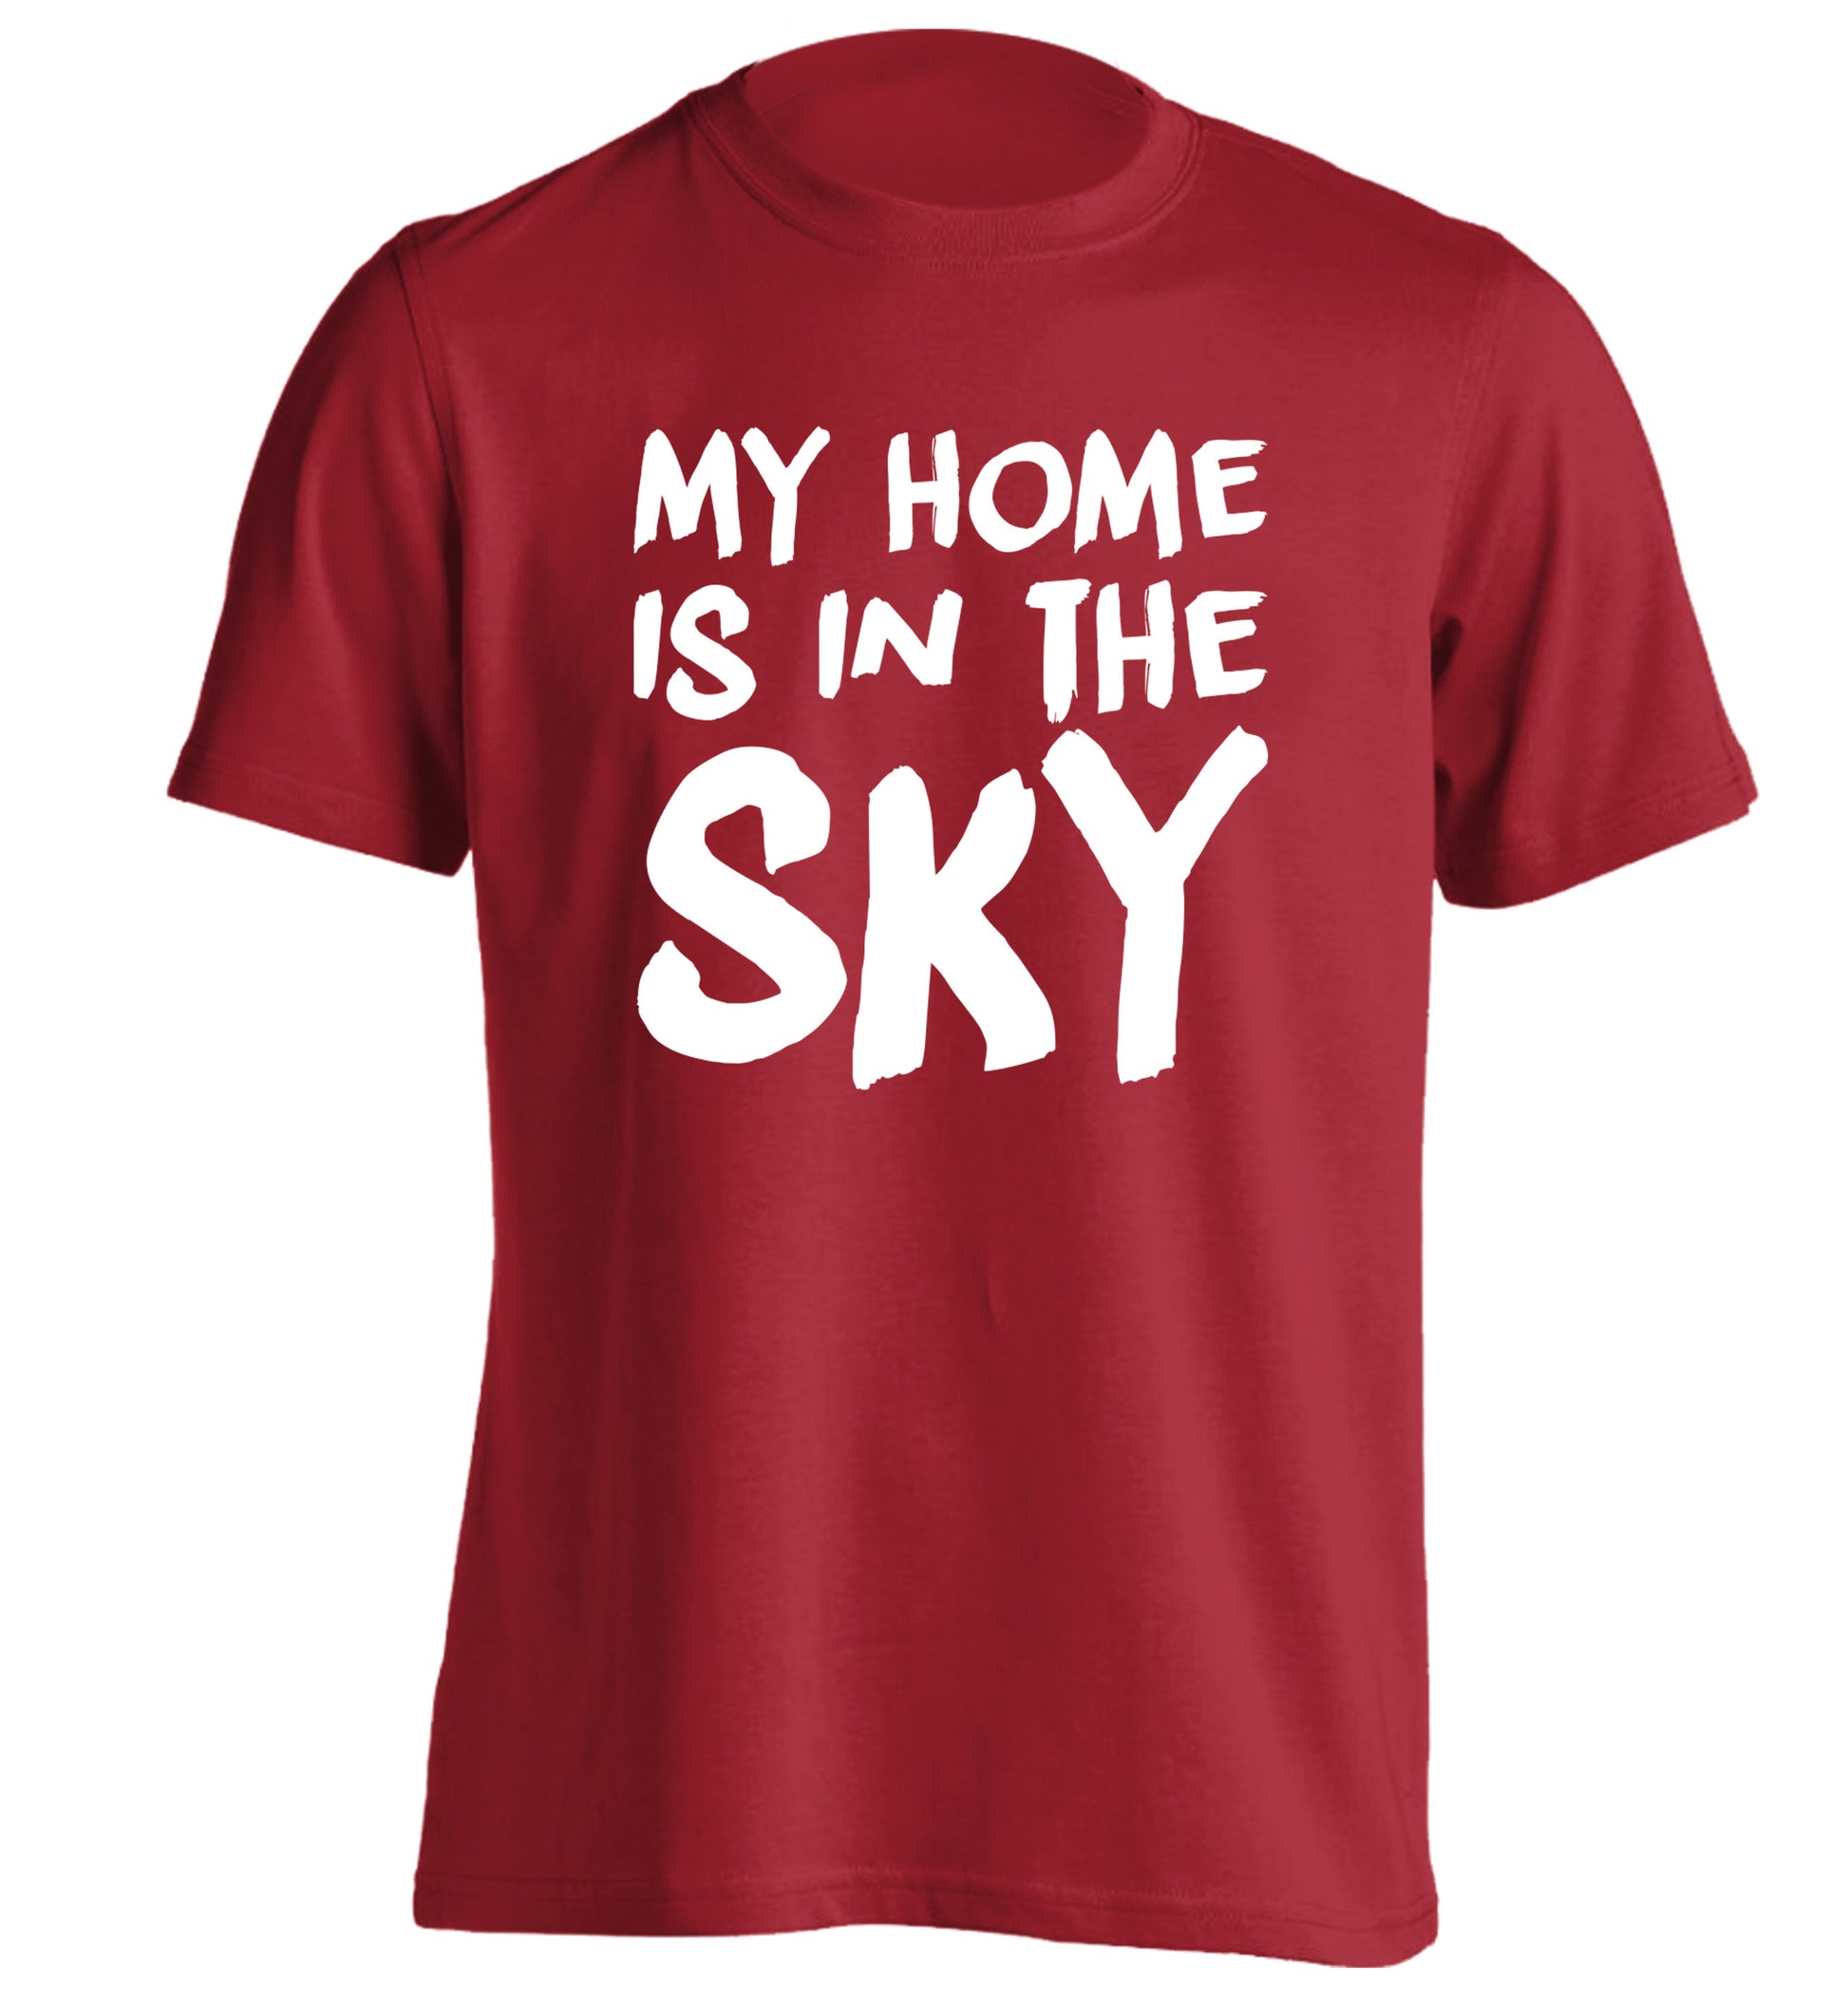 My home is in the sky adults unisex red Tshirt 2XL